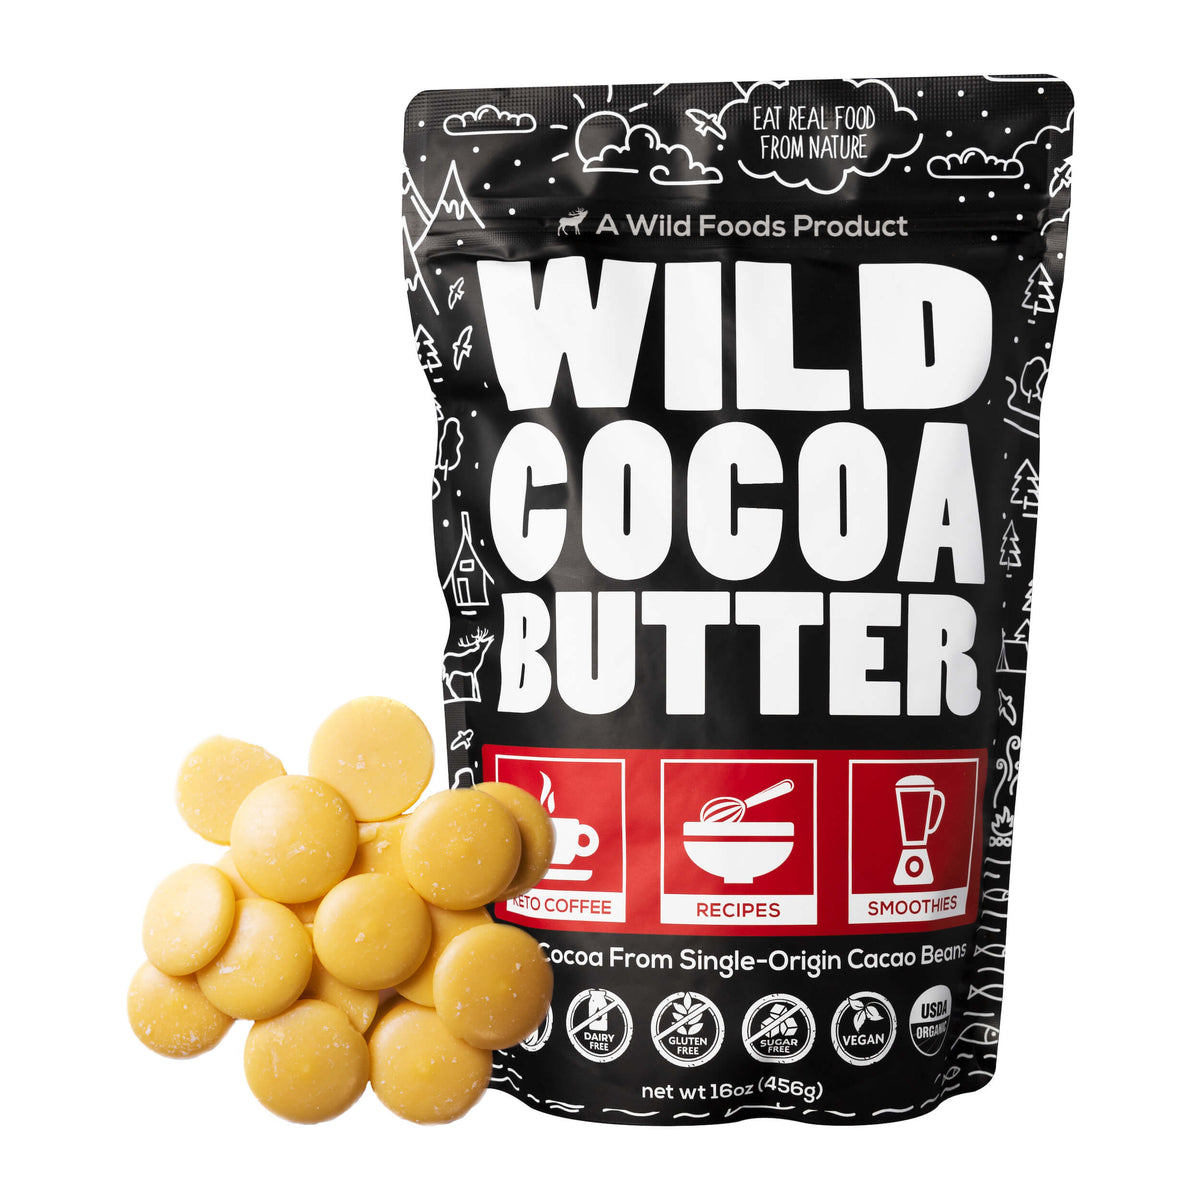 Cocoa Butter Wafers, Raw & Organic 16oz case of 6 by Wild Foods